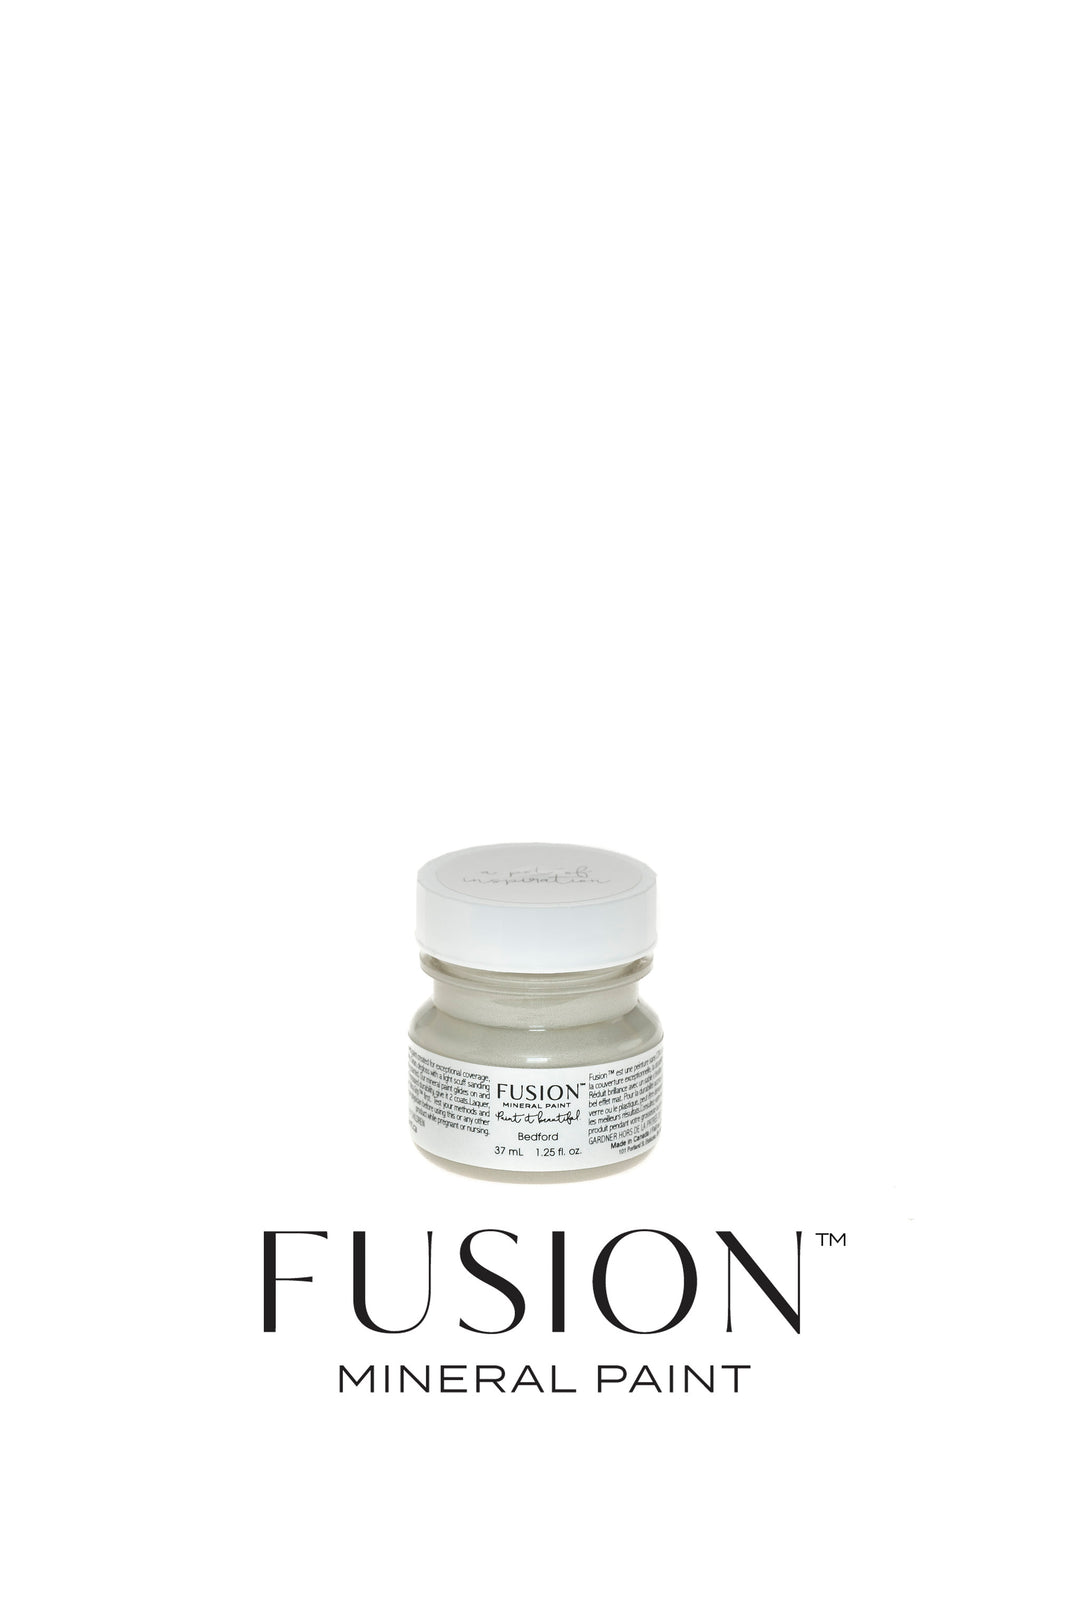 Fusion Mineral Paint - BEDFORD (Tester) - Acosta's Home